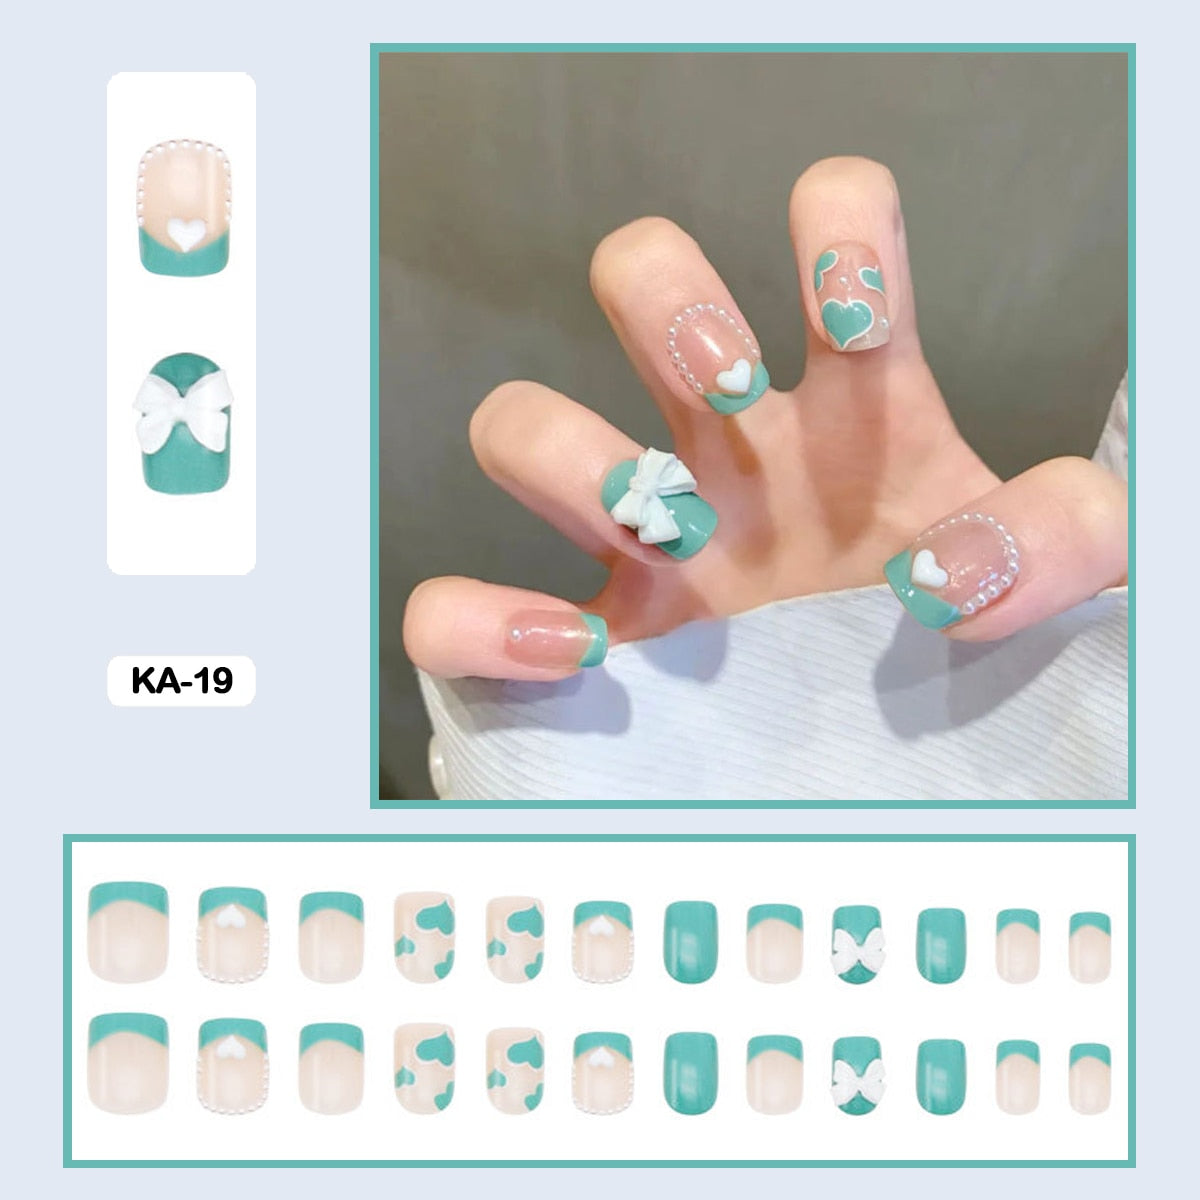 24pcs/box Press On False Nails Cute Nail Art Wearable Fake Nails Heart Tips With Glue and Sticker With Wearing Tools As Gift